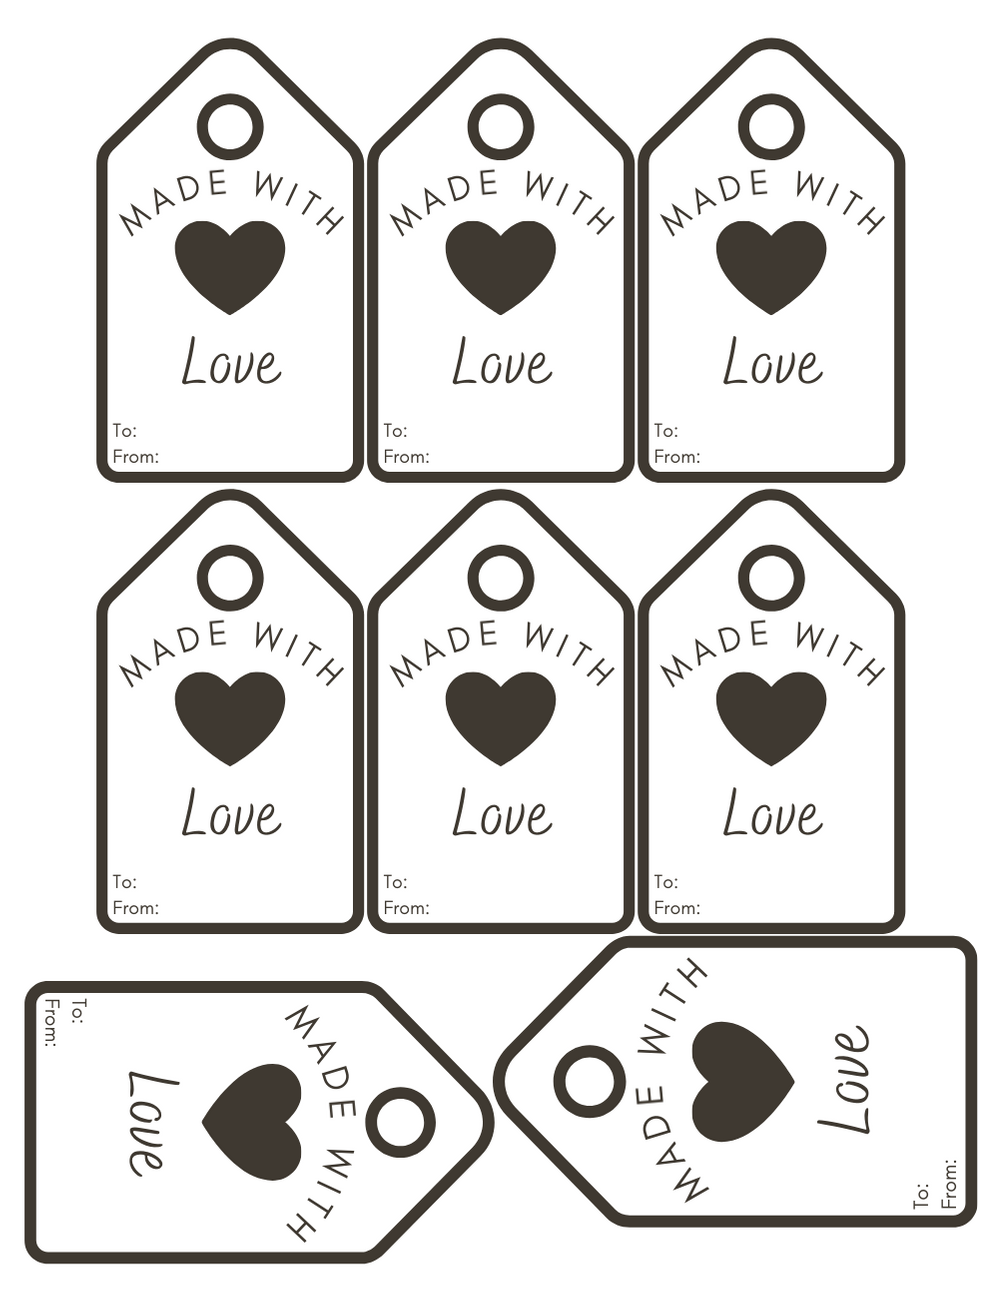 Handmade with love tags  add a tag to your handmade gifts – Hanna